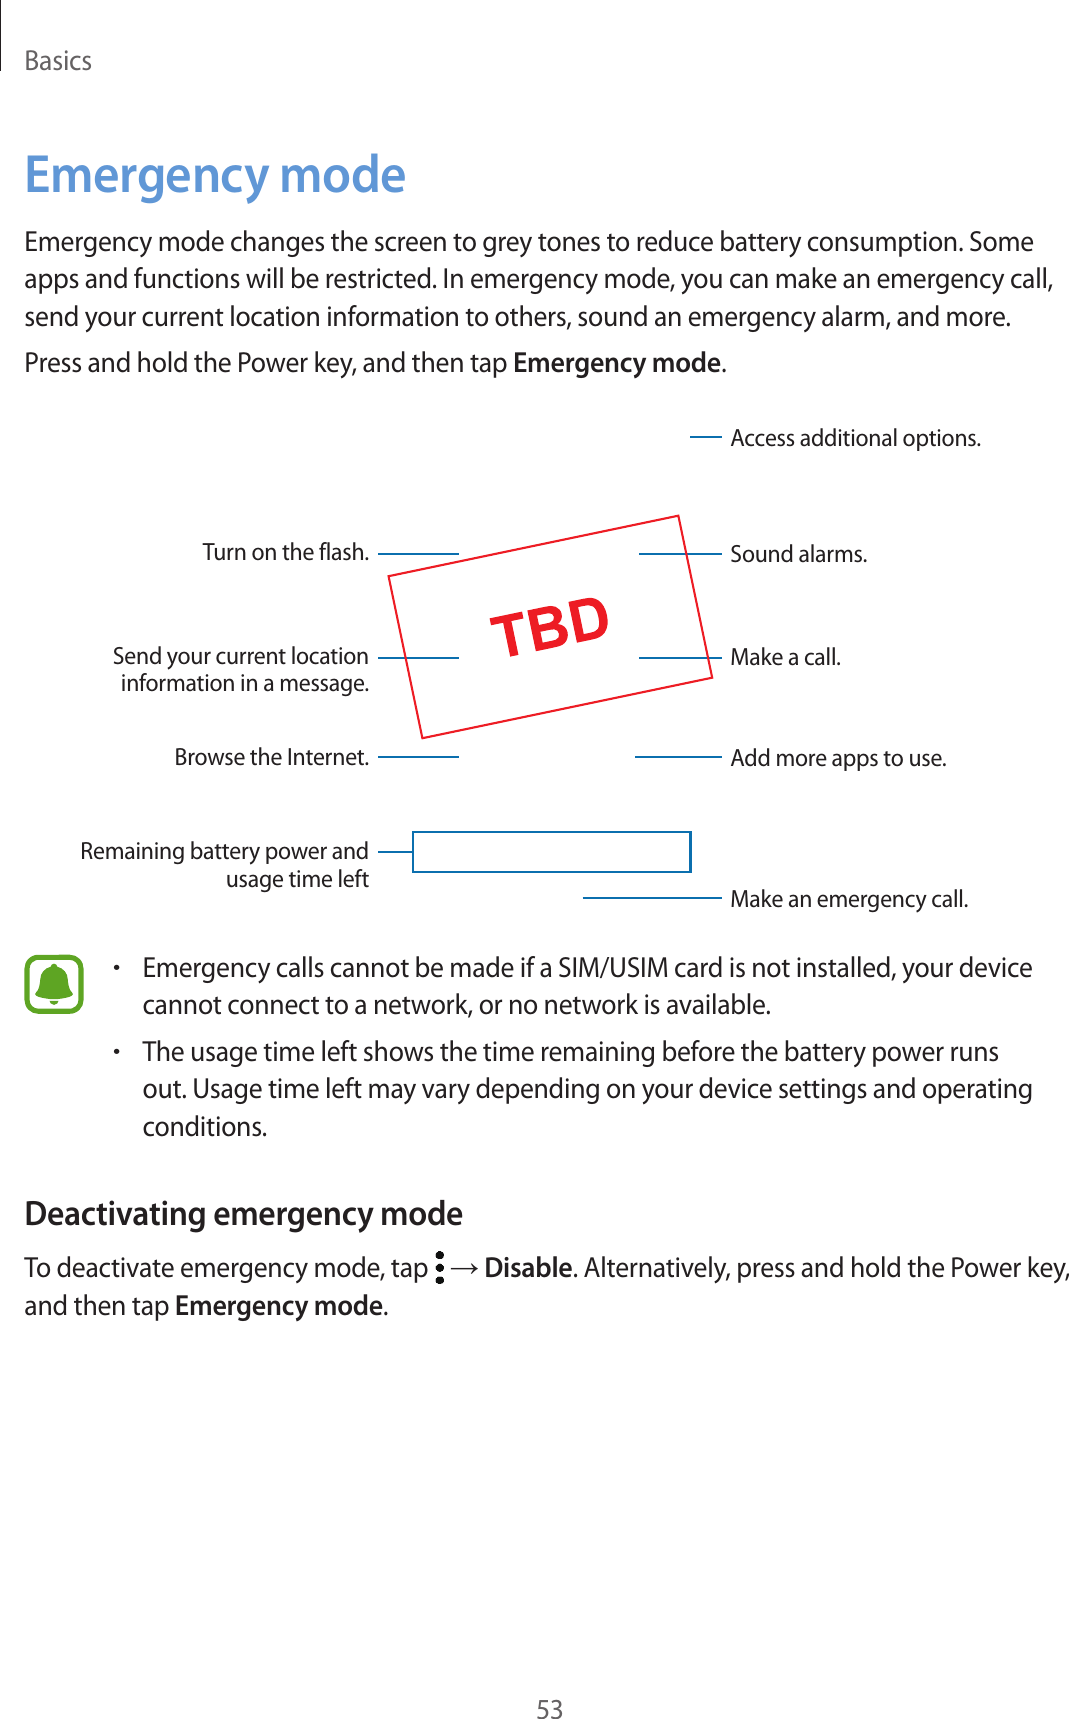 Basics53Emergency modeEmergency mode changes the screen to grey tones to reduce battery consumption. Some apps and functions will be restricted. In emergency mode, you can make an emergency call, send your current location information to others, sound an emergency alarm, and more.Press and hold the Power key, and then tap Emergency mode.Sound alarms.Add more apps to use.Make an emergency call.Remaining battery power and usage time leftTurn on the flash.Make a call.Send your current location information in a message.Browse the Internet.Access additional options.•Emergency calls cannot be made if a SIM/USIM card is not installed, your device cannot connect to a network, or no network is available.•The usage time left shows the time remaining before the battery power runs out. Usage time left may vary depending on your device settings and operating conditions.Deactivating emergency modeTo deactivate emergency mode, tap   → Disable. Alternatively, press and hold the Power key, and then tap Emergency mode.